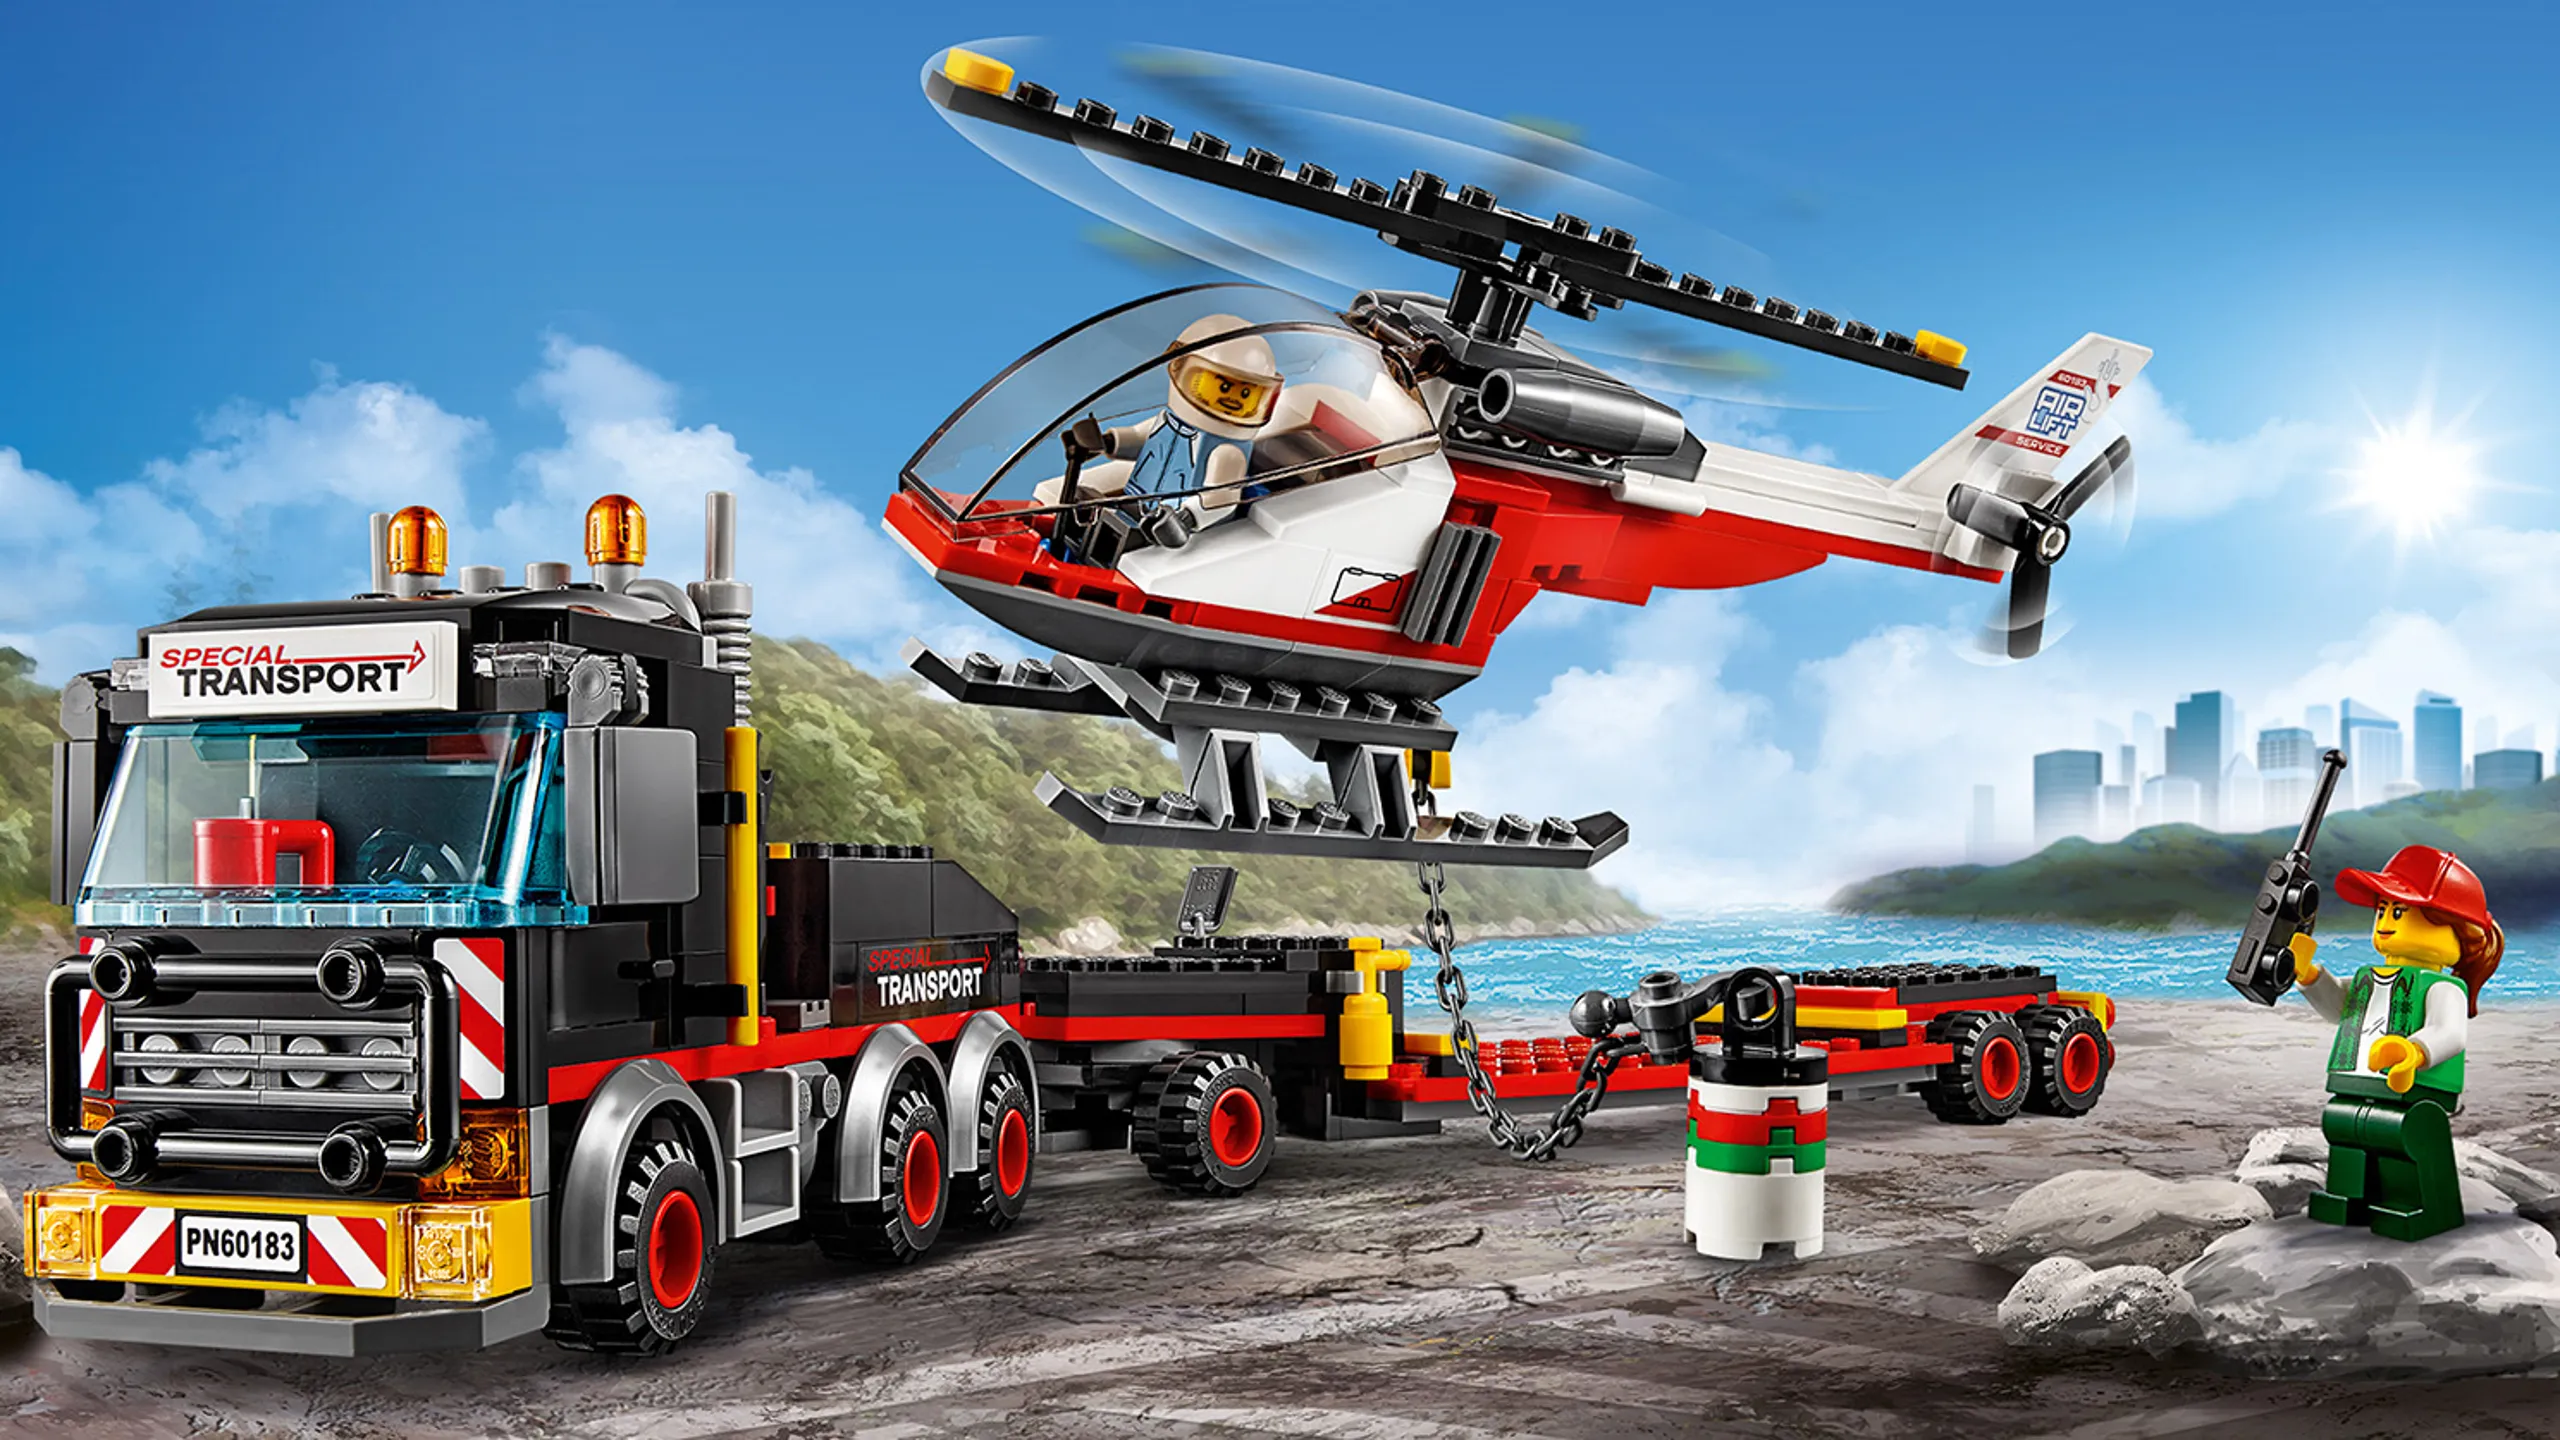 LEGO City Great Vehicles - 60183 Heavy Cargo Transport - The helicopter is about to land on the truck that can transport heavy cargo.